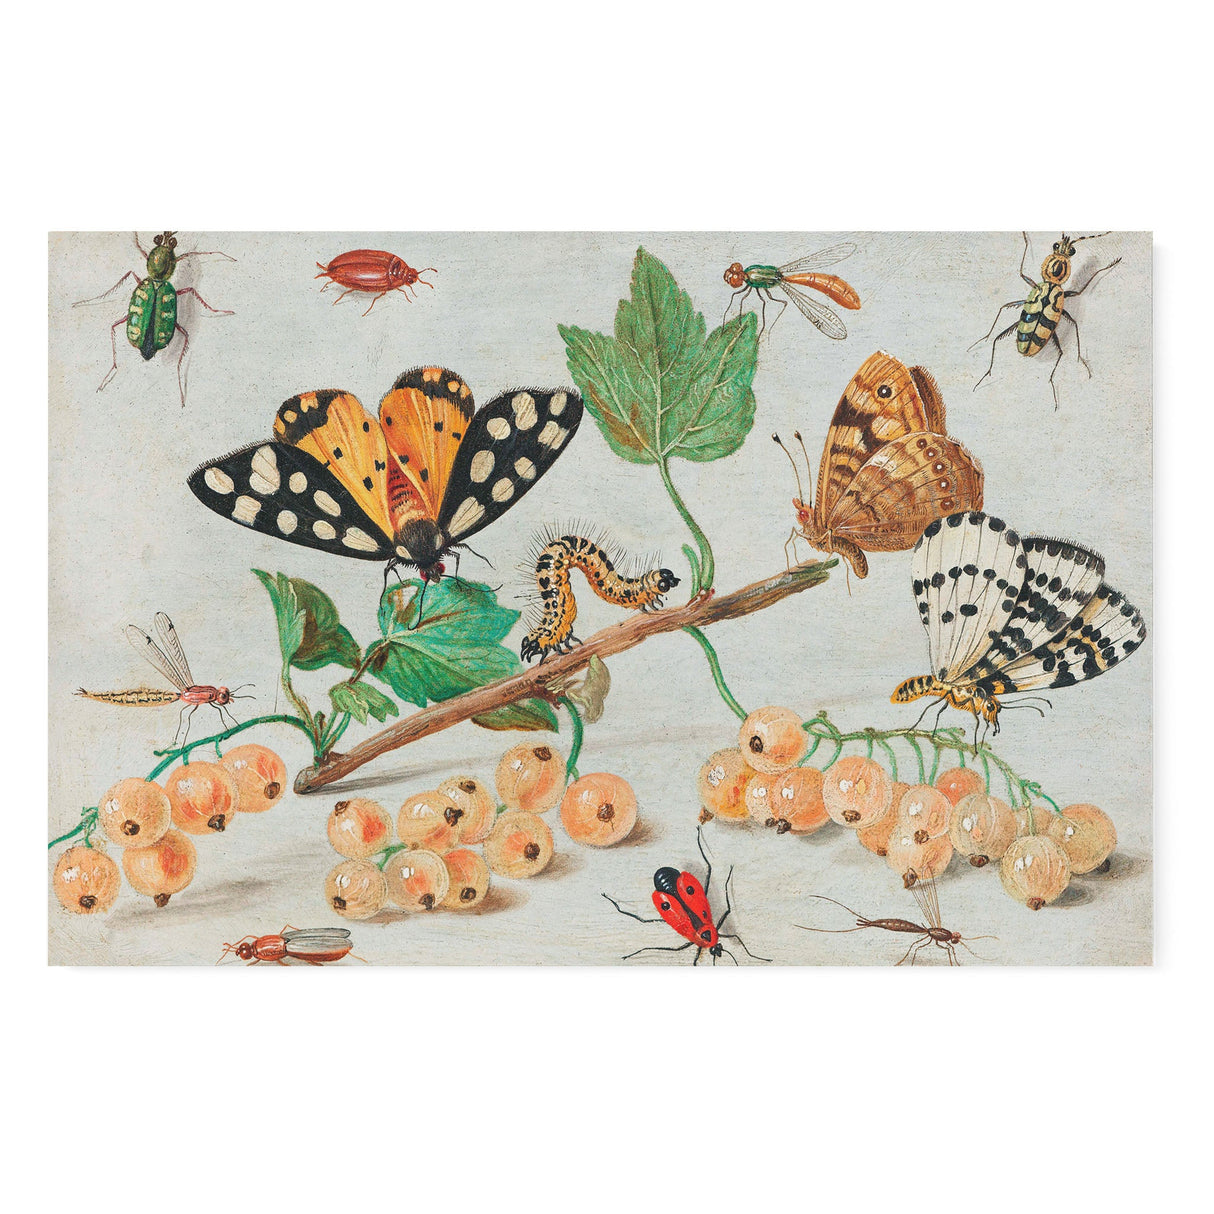 "Insects and Fruits" Vintage Wall Art Canvas by Jan van Kessel Canvas Wall Art Sckribbles 48x32  